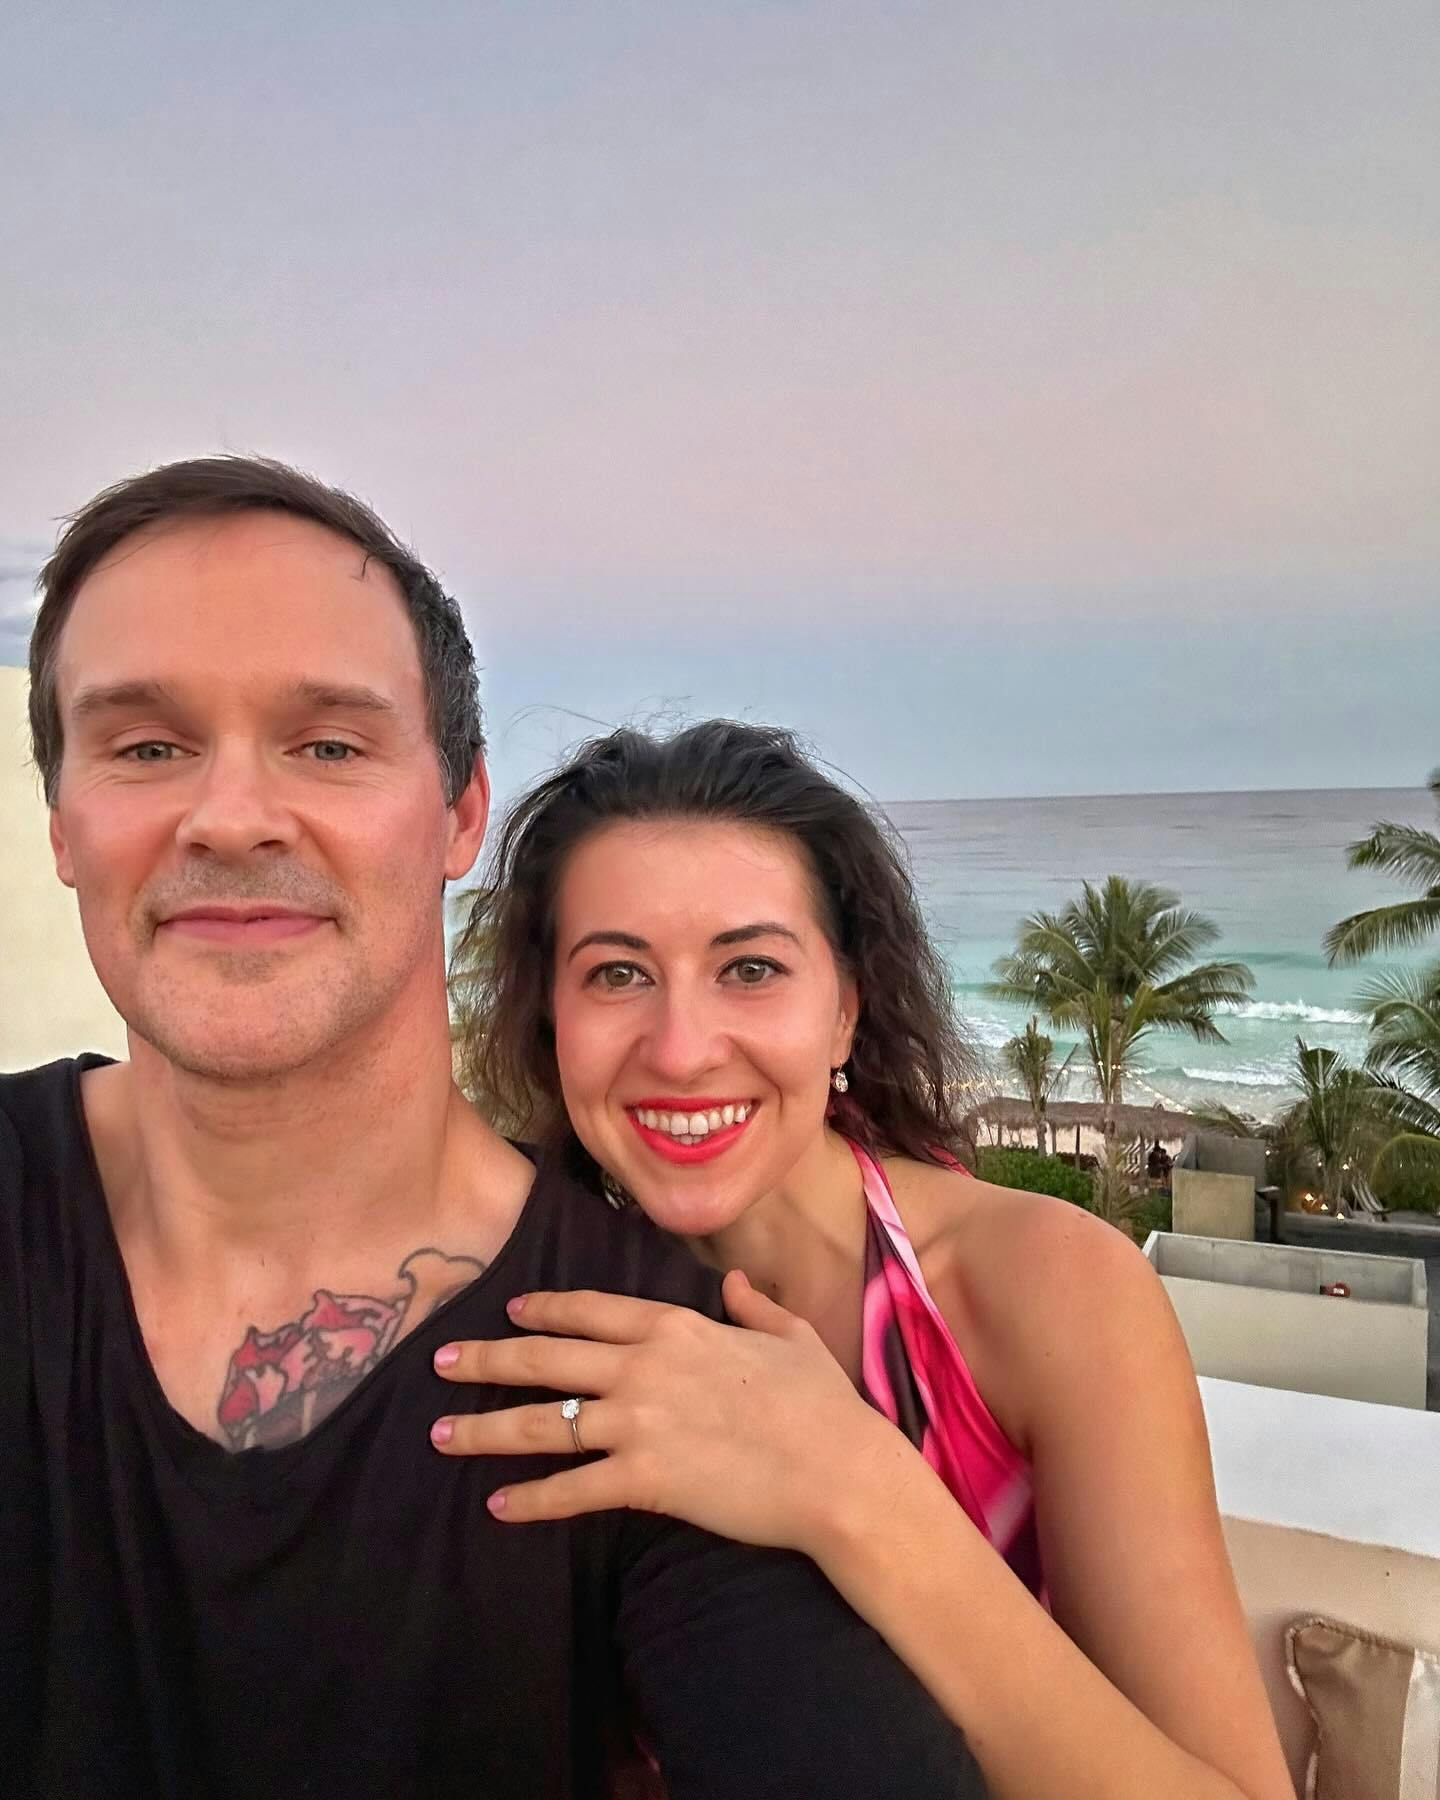 A very romantic surprise during our vacation in Mexico 🙂 Saying ‘YES’ to a new chapter of my life with my love ❤️

When you are really clear on what you want in a relationship, and strive to you possess those qualities yourself, the Universe helps you manifest it when you the least expect it 🙂

Grateful for the blessing to be consciously rising in love with my dream partner 💍♥️🌹 

#engaged #love